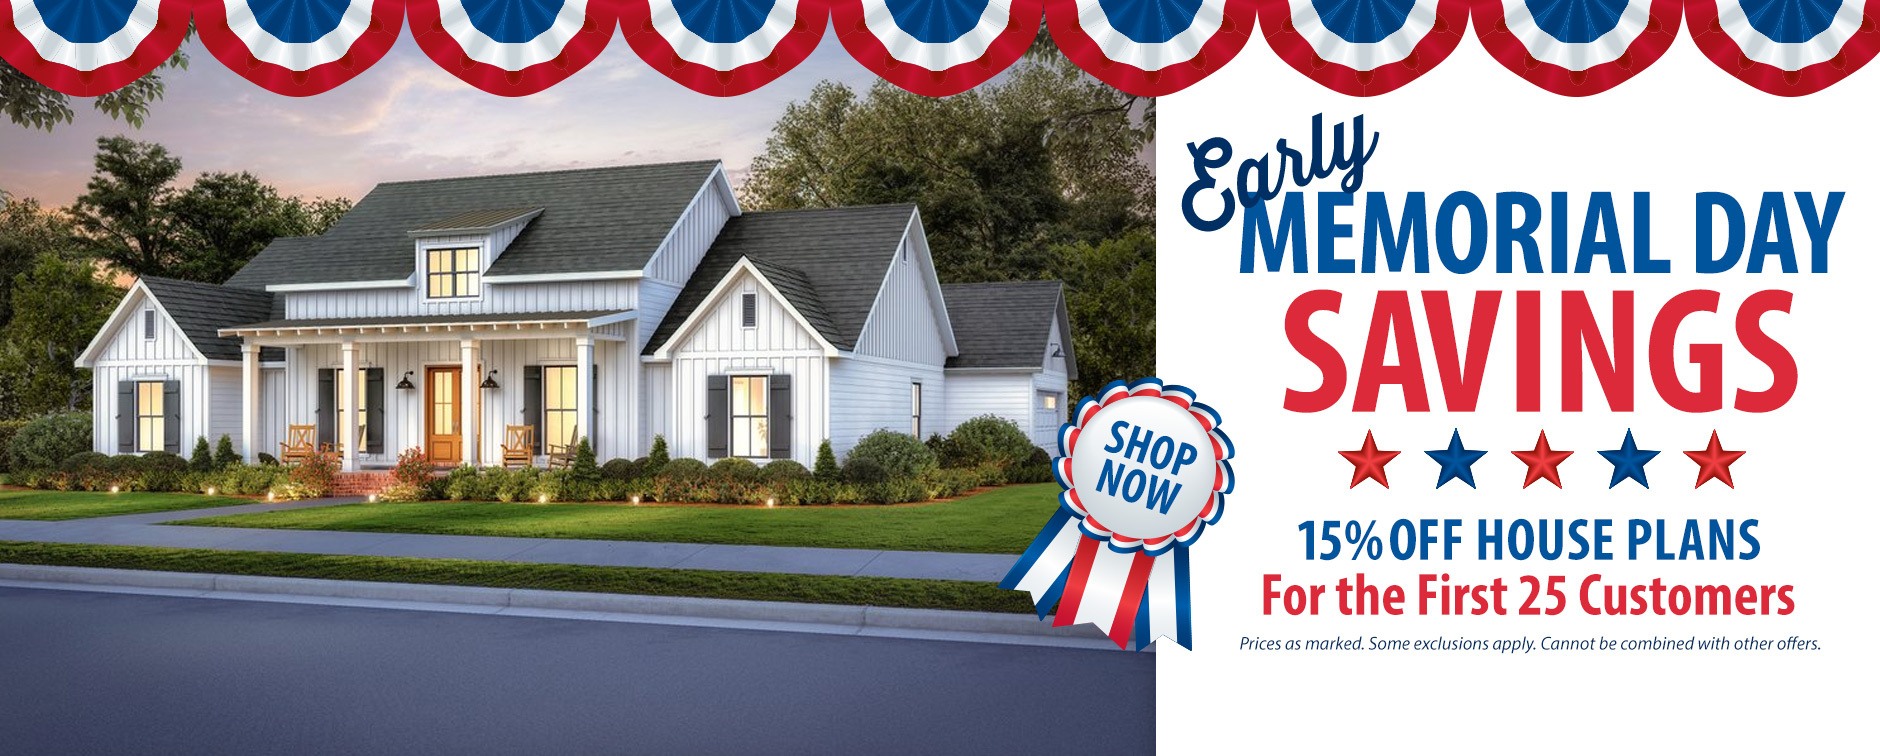 Take Advantage of Early Memorial Day Savings! Get 15% Off House Plans. First 25 Customers.